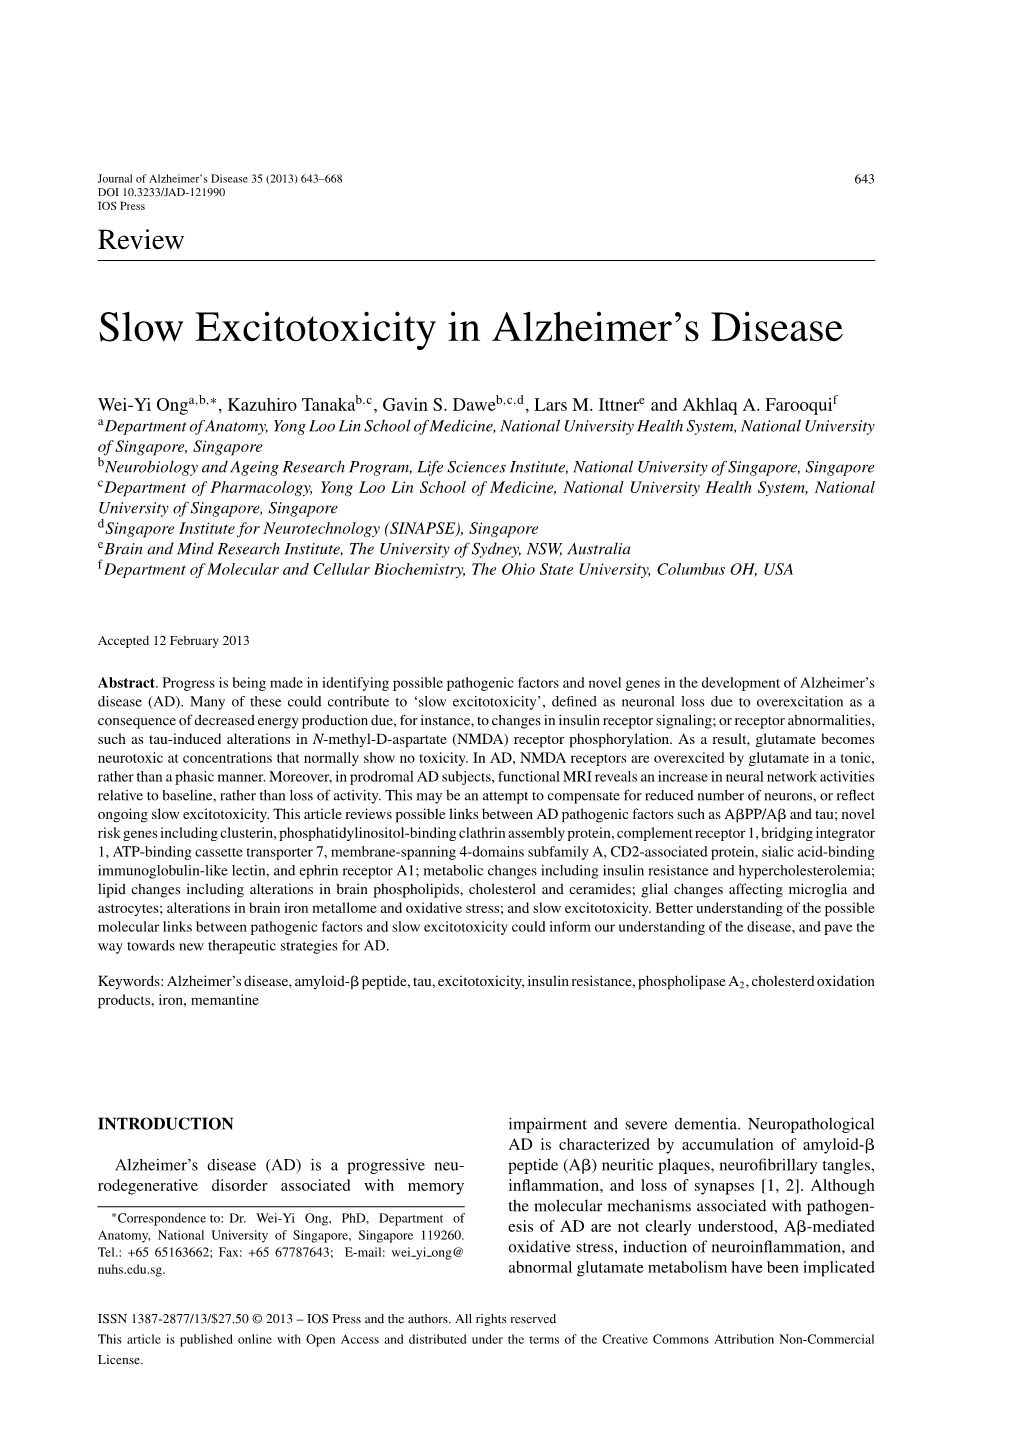 Slow Excitotoxicity in Alzheimer's Disease